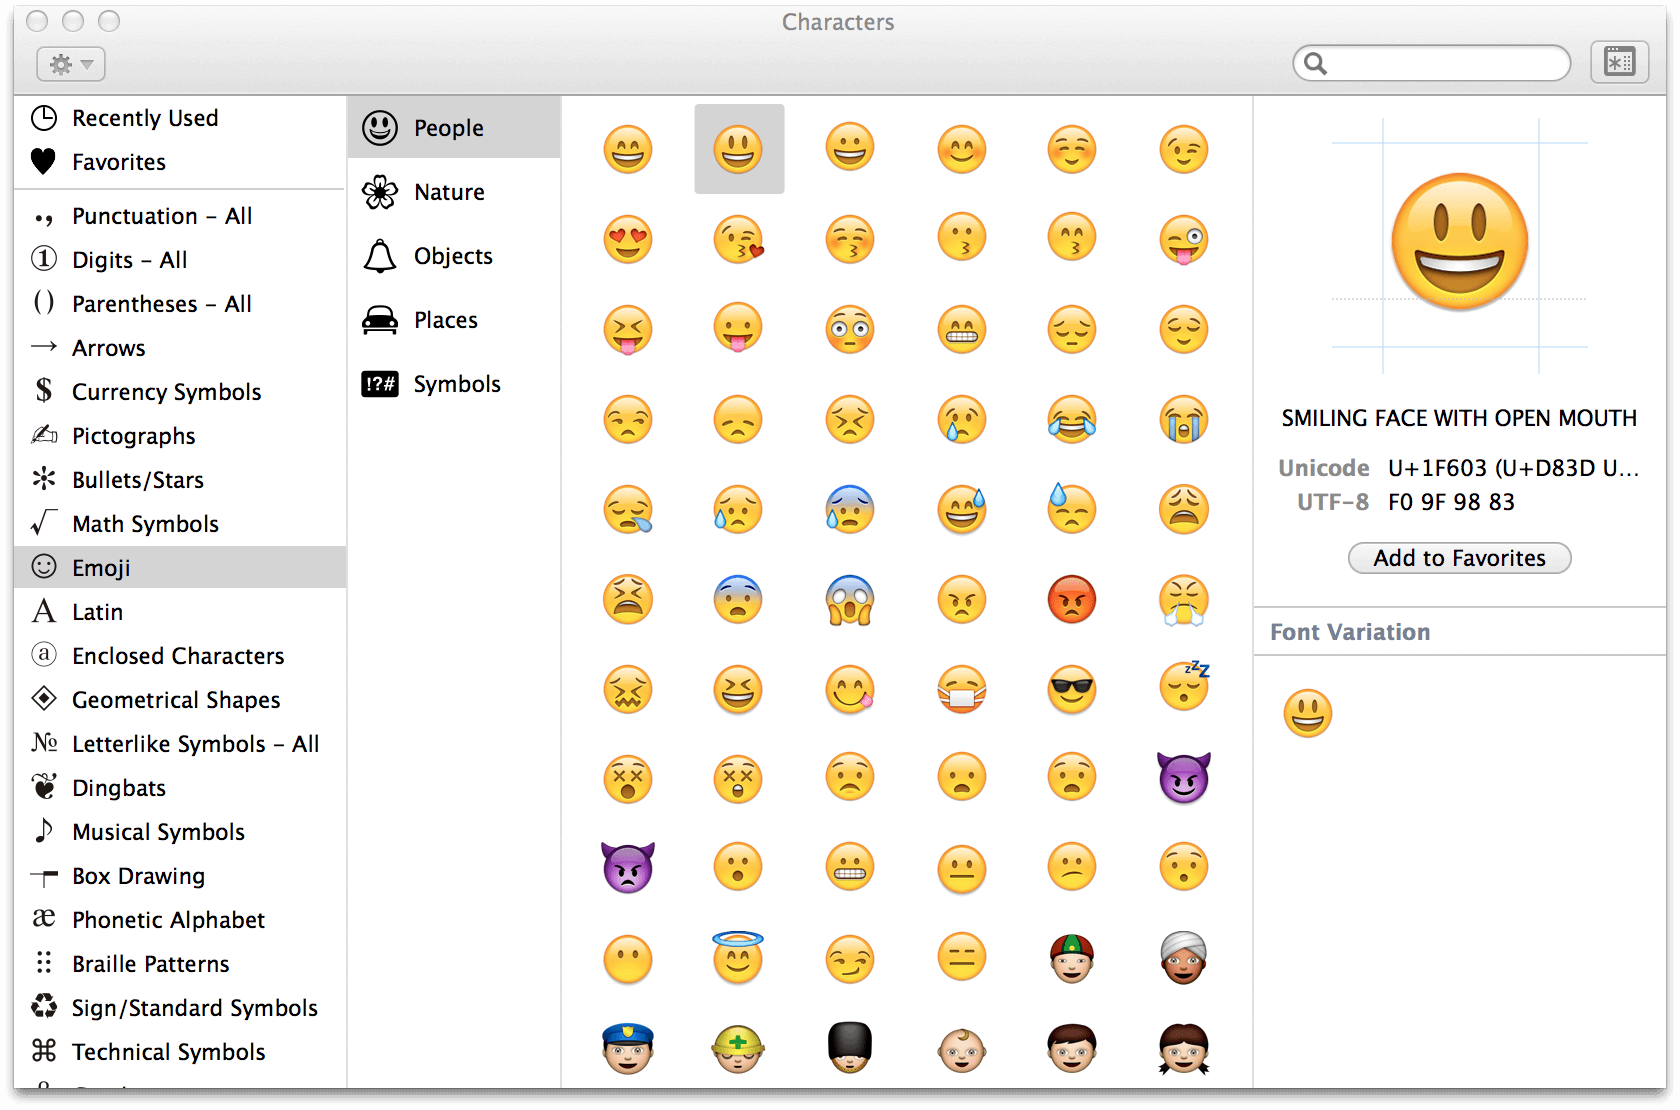 The Character Viewer in OS X showing a table of Emoji and Unicode character information